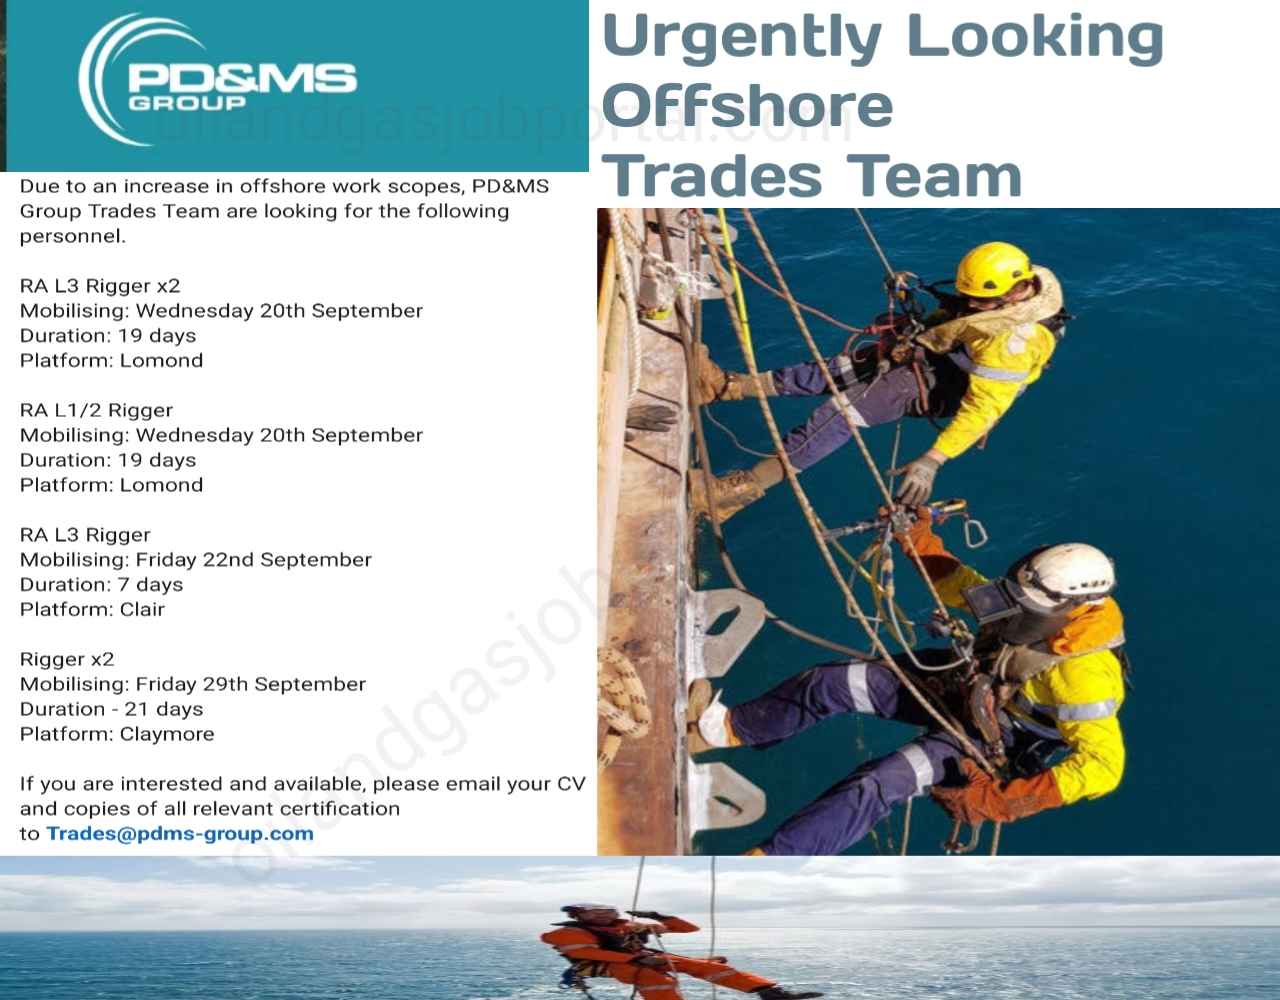 PD&MS Group Looking Offshore Trades Team  for Offshore Platform 